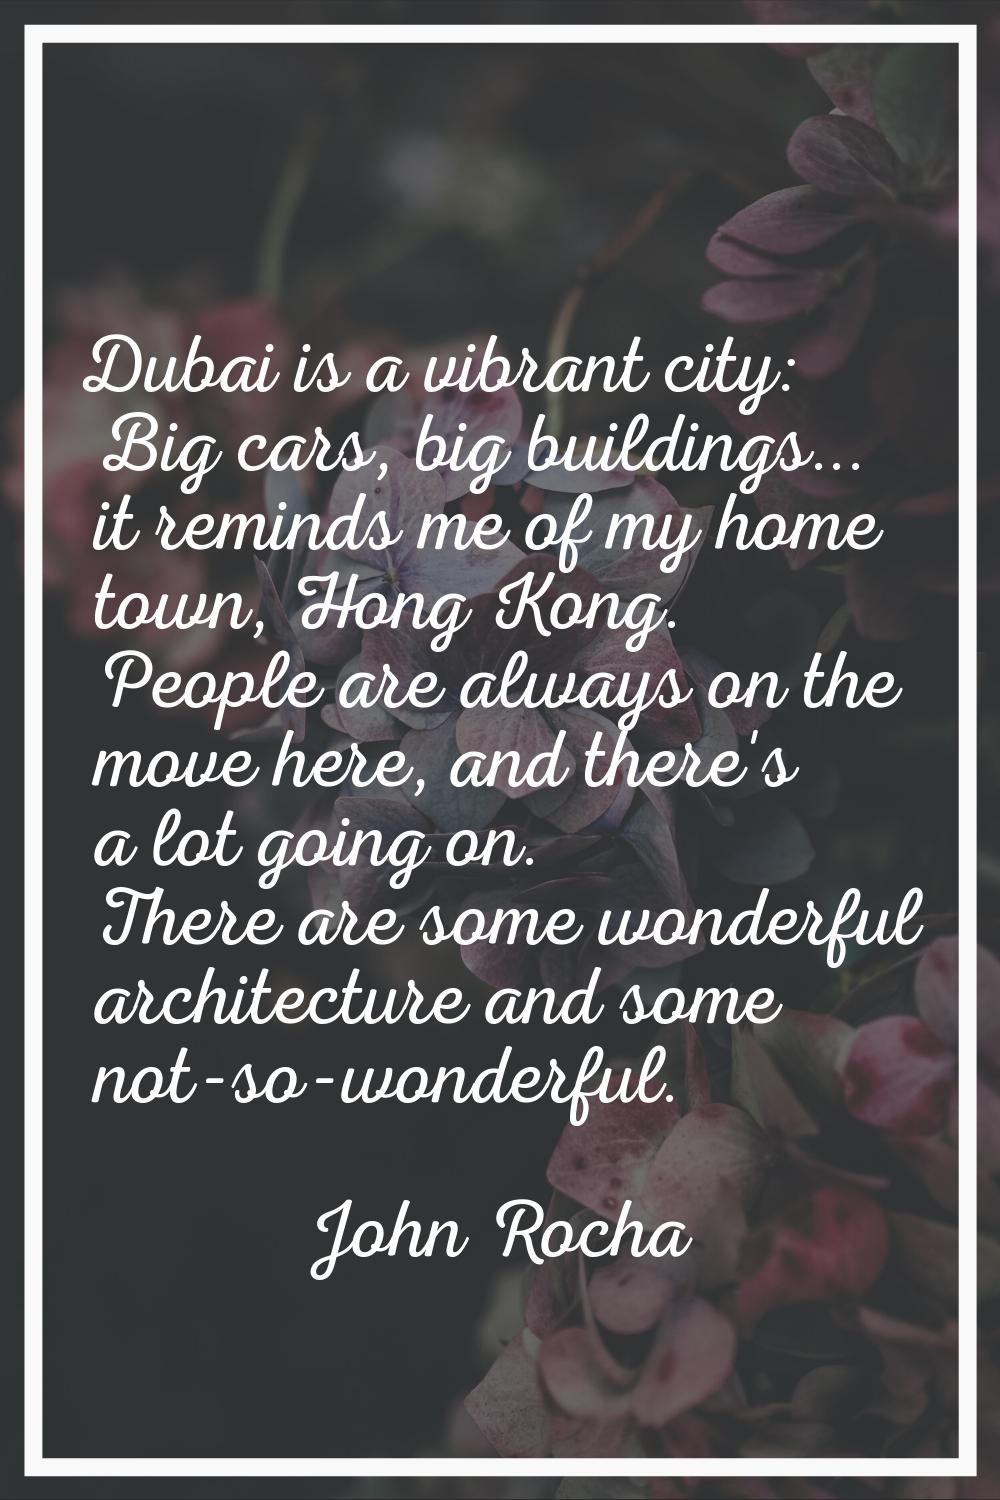 Dubai is a vibrant city: Big cars, big buildings... it reminds me of my home town, Hong Kong. Peopl